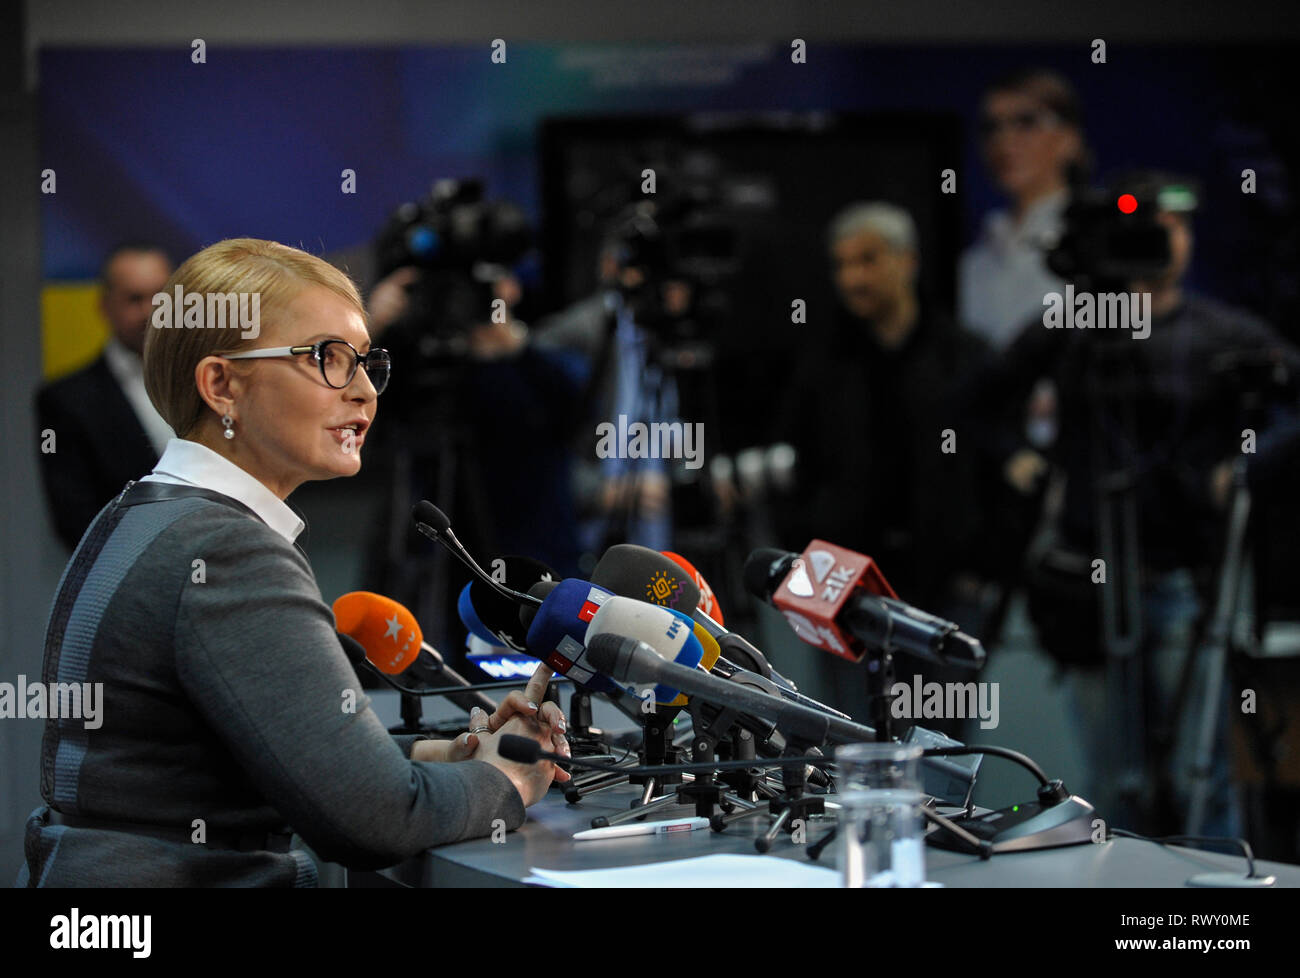 Leader of the Ukrainian political party seen during a press conference.  Ukrainian presidential candidate Yulia Tymoshenko has signed commitments to voters of Ukraine. Stock Photo